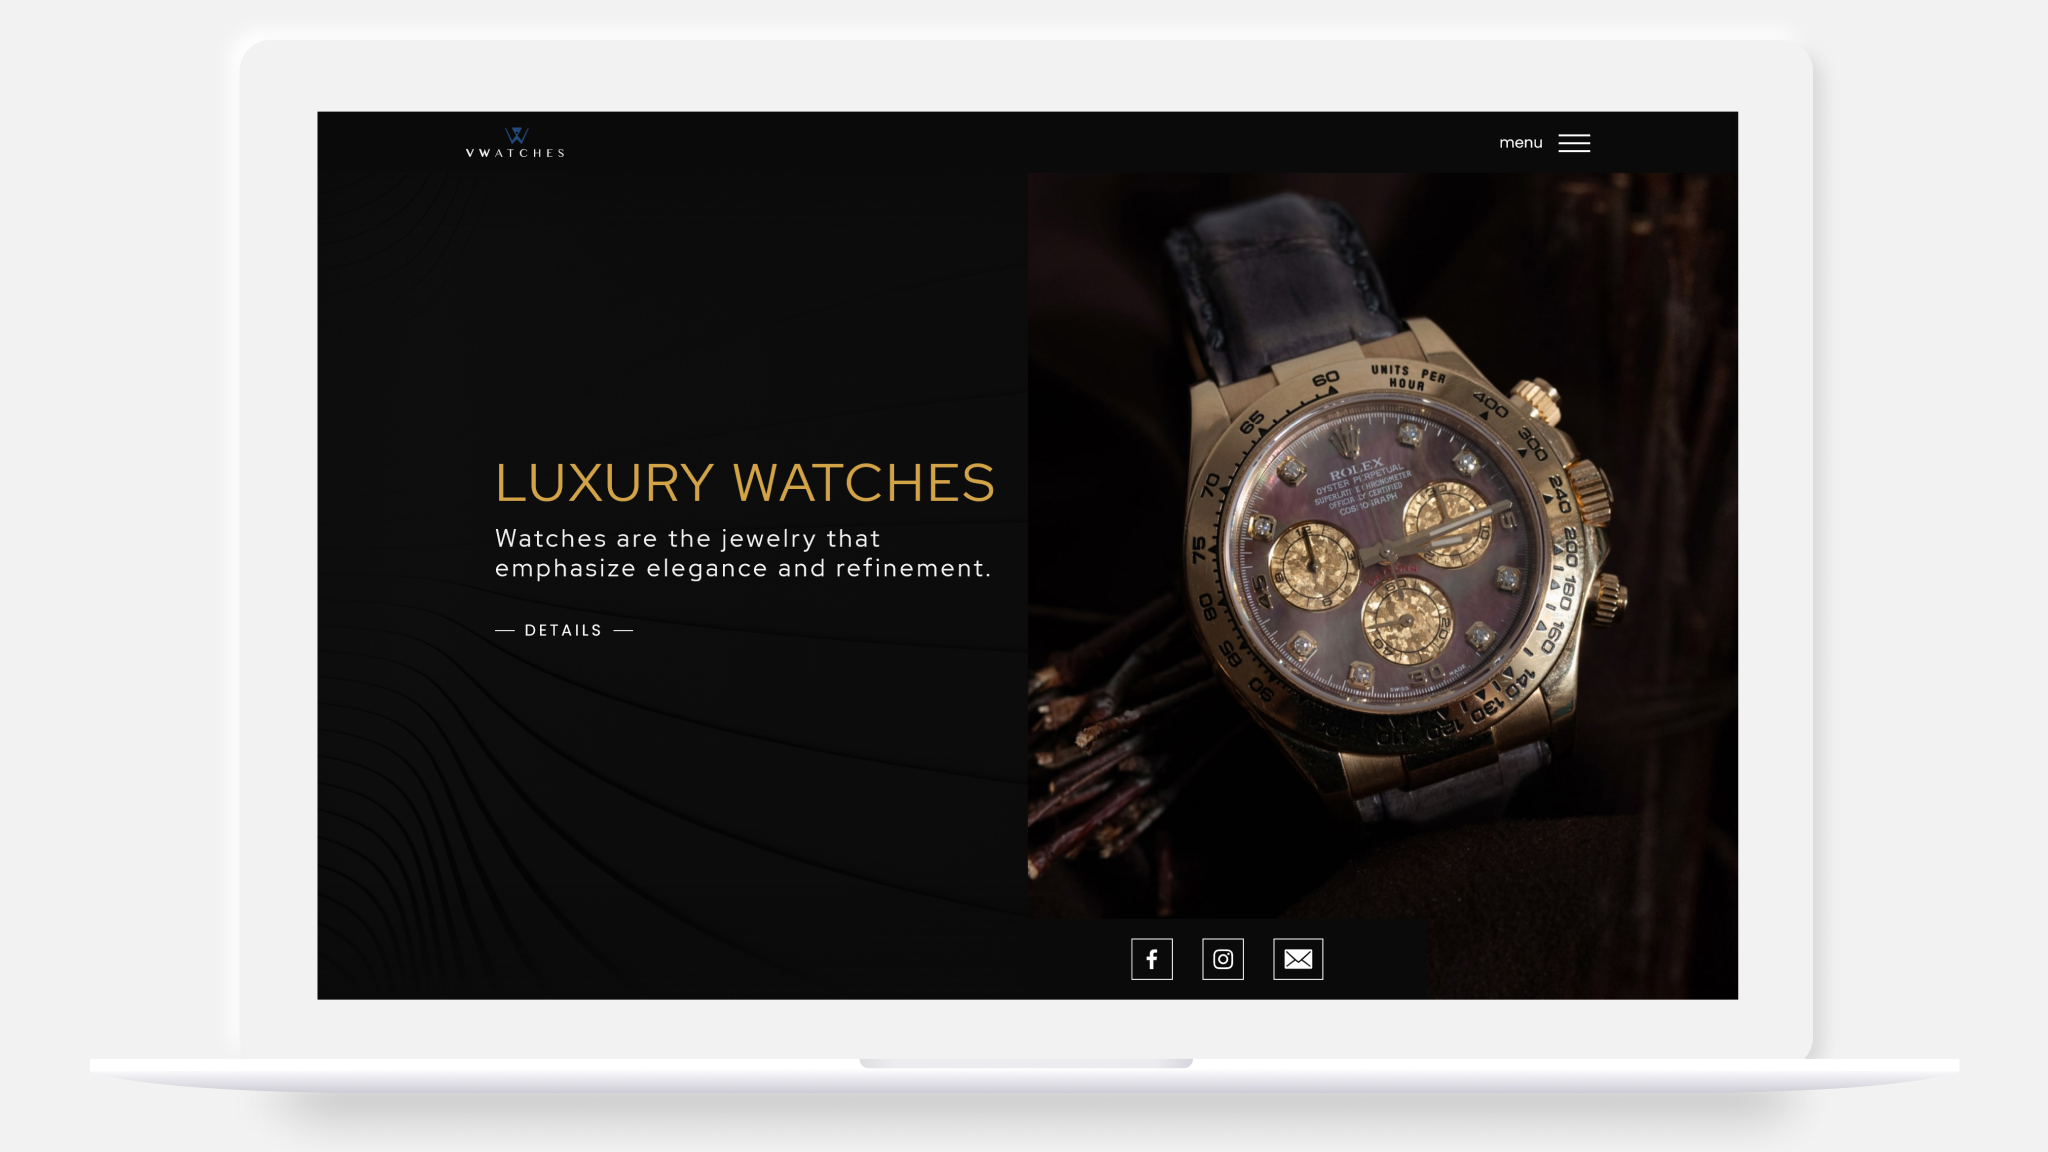 /images/projects/vwatch/macbook-vwatch.jpg